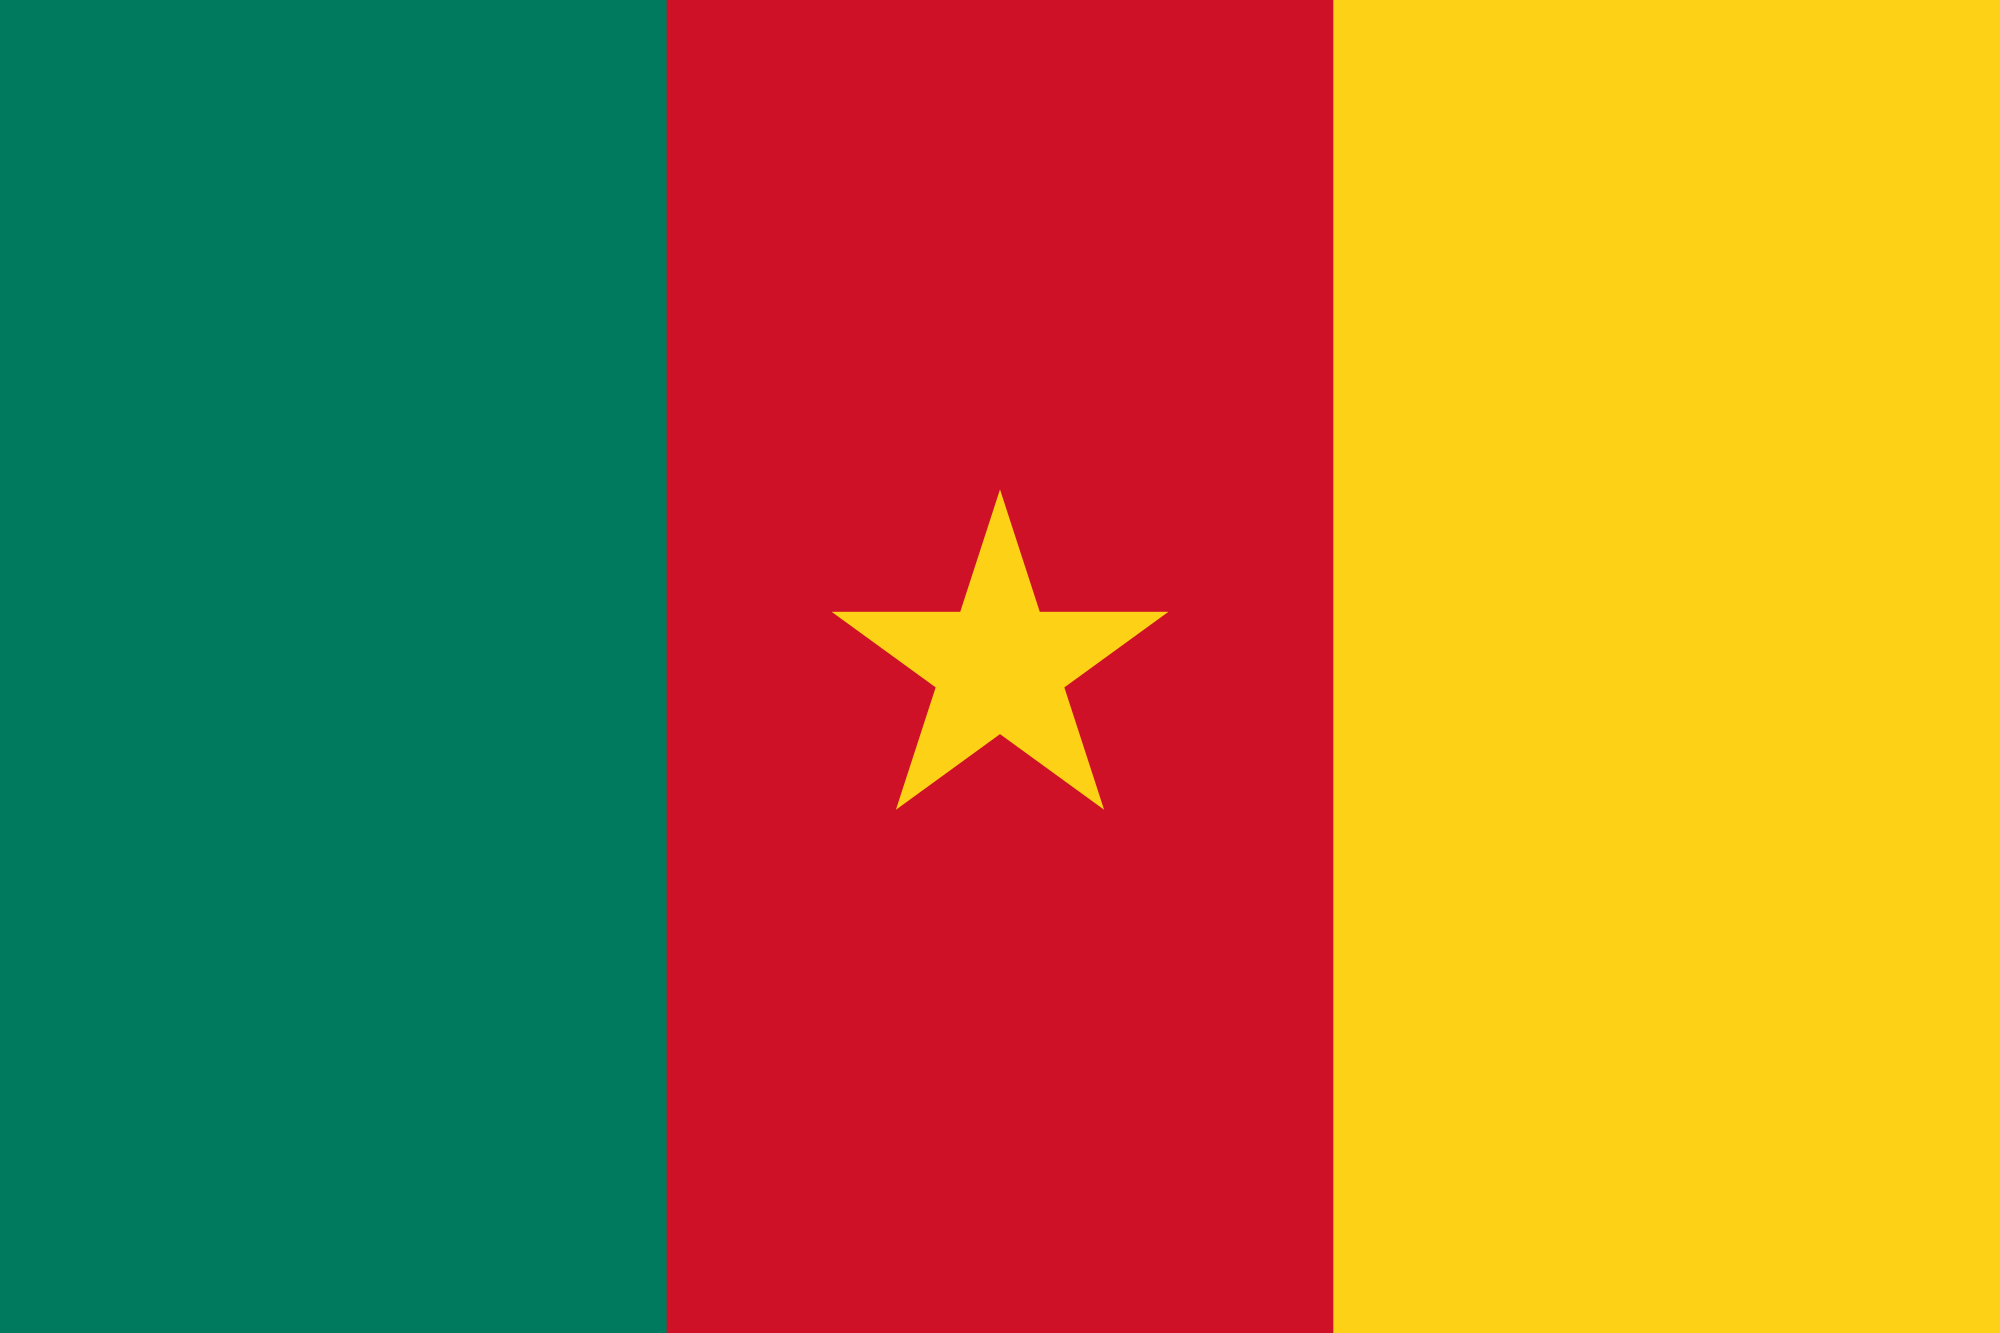 O Cameroon, Cradle of Our Forefathers #